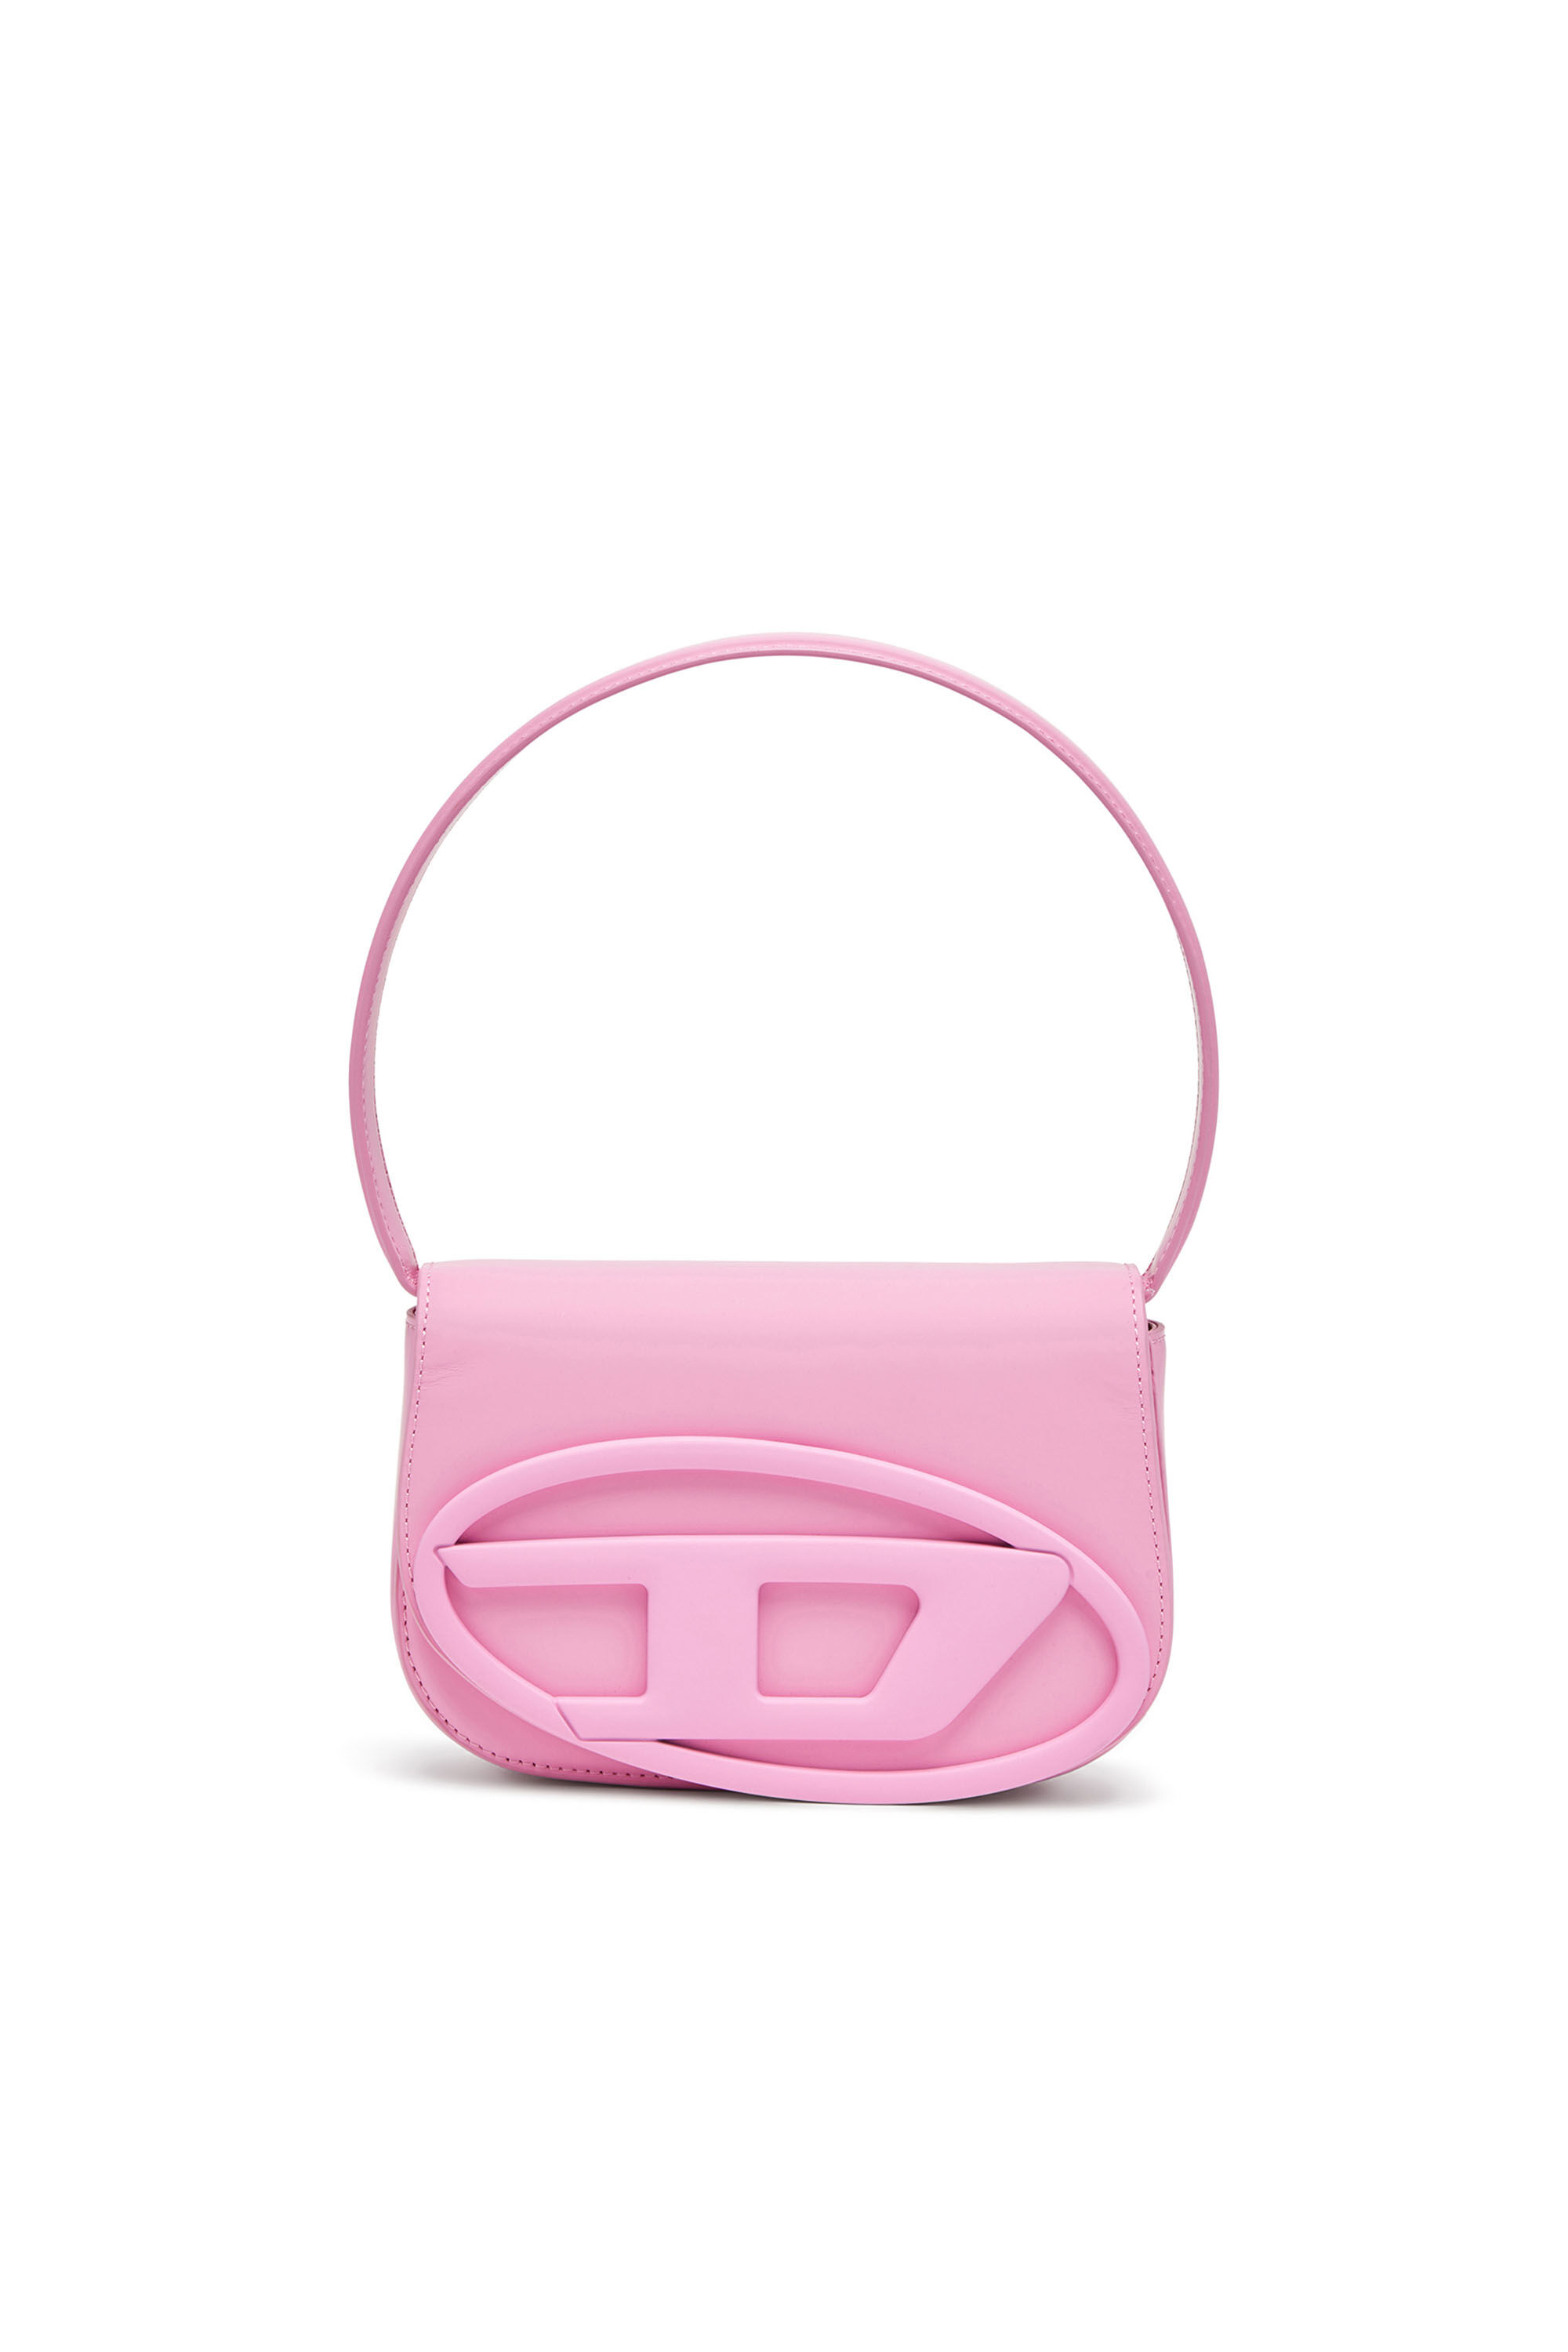 Diesel - 1DR, Donna 1DR-Iconica borsa a spalla in pelle matte in Rosa - Image 6